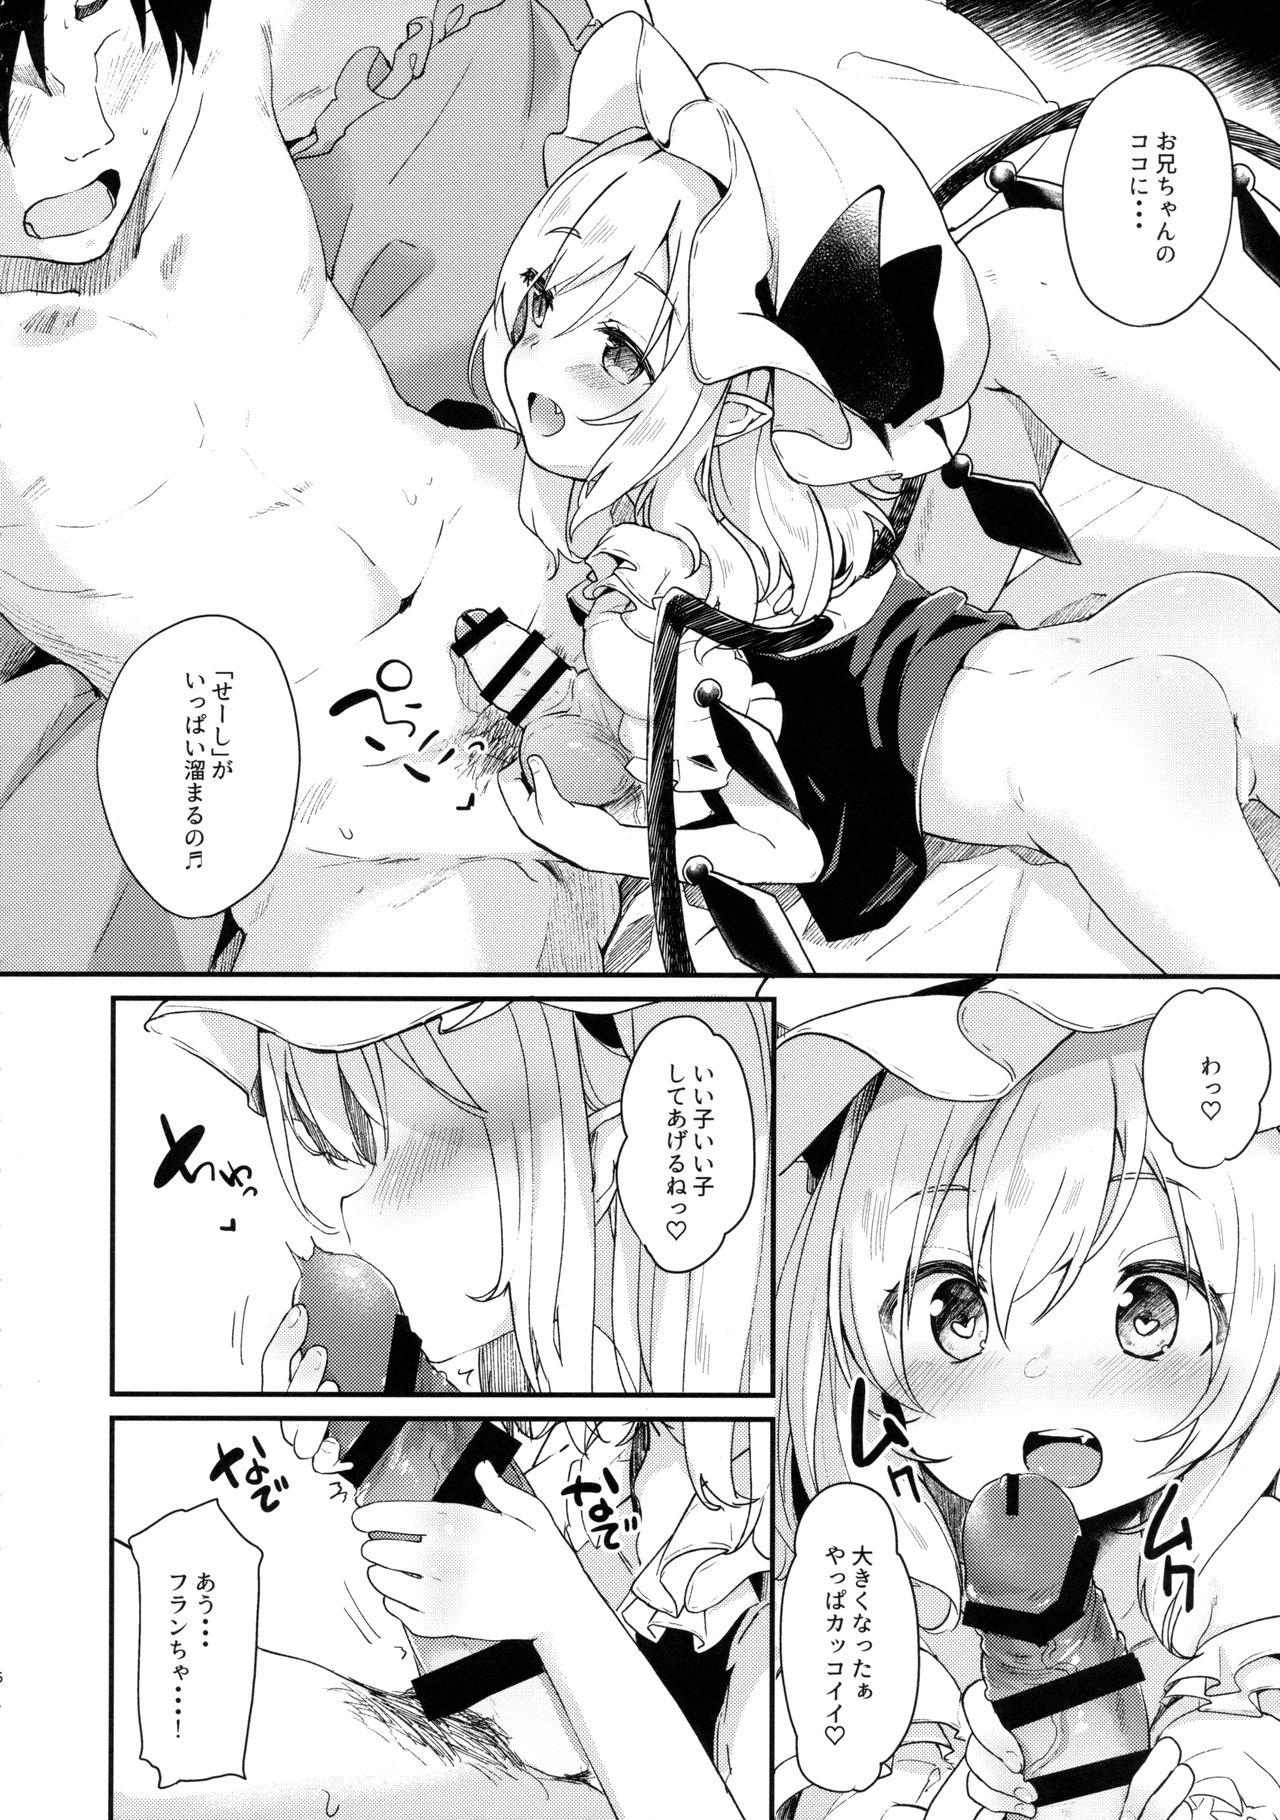 Slapping FLANEX - Touhou project Gozo - Page 5